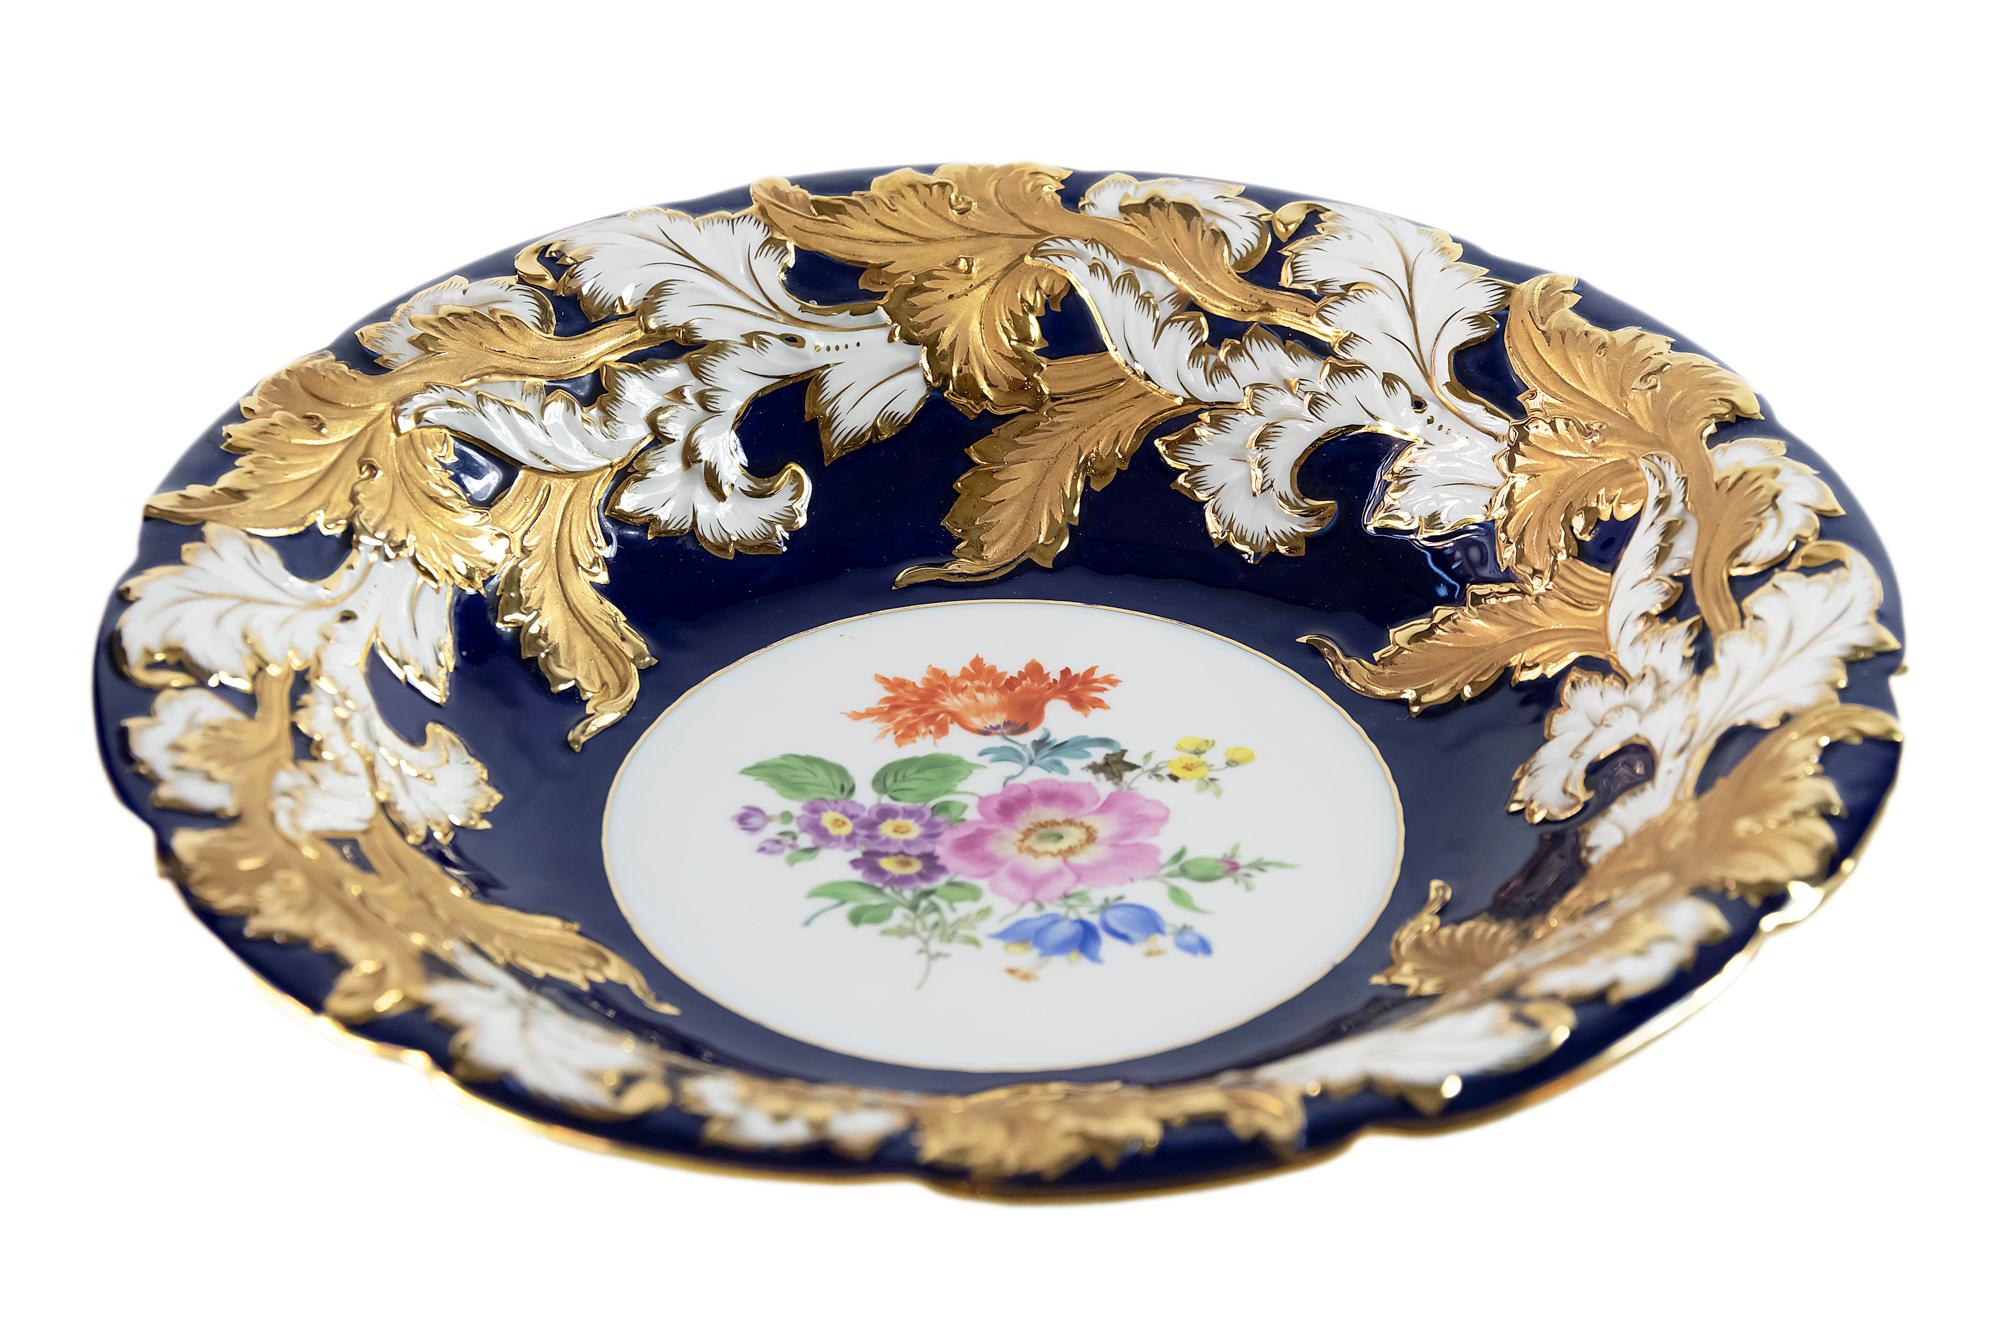 Meissen Porcelain deep cabinet plate/bowl is cobalt blue color with rich gold decor.
It is hand painted with floral motive in the center.